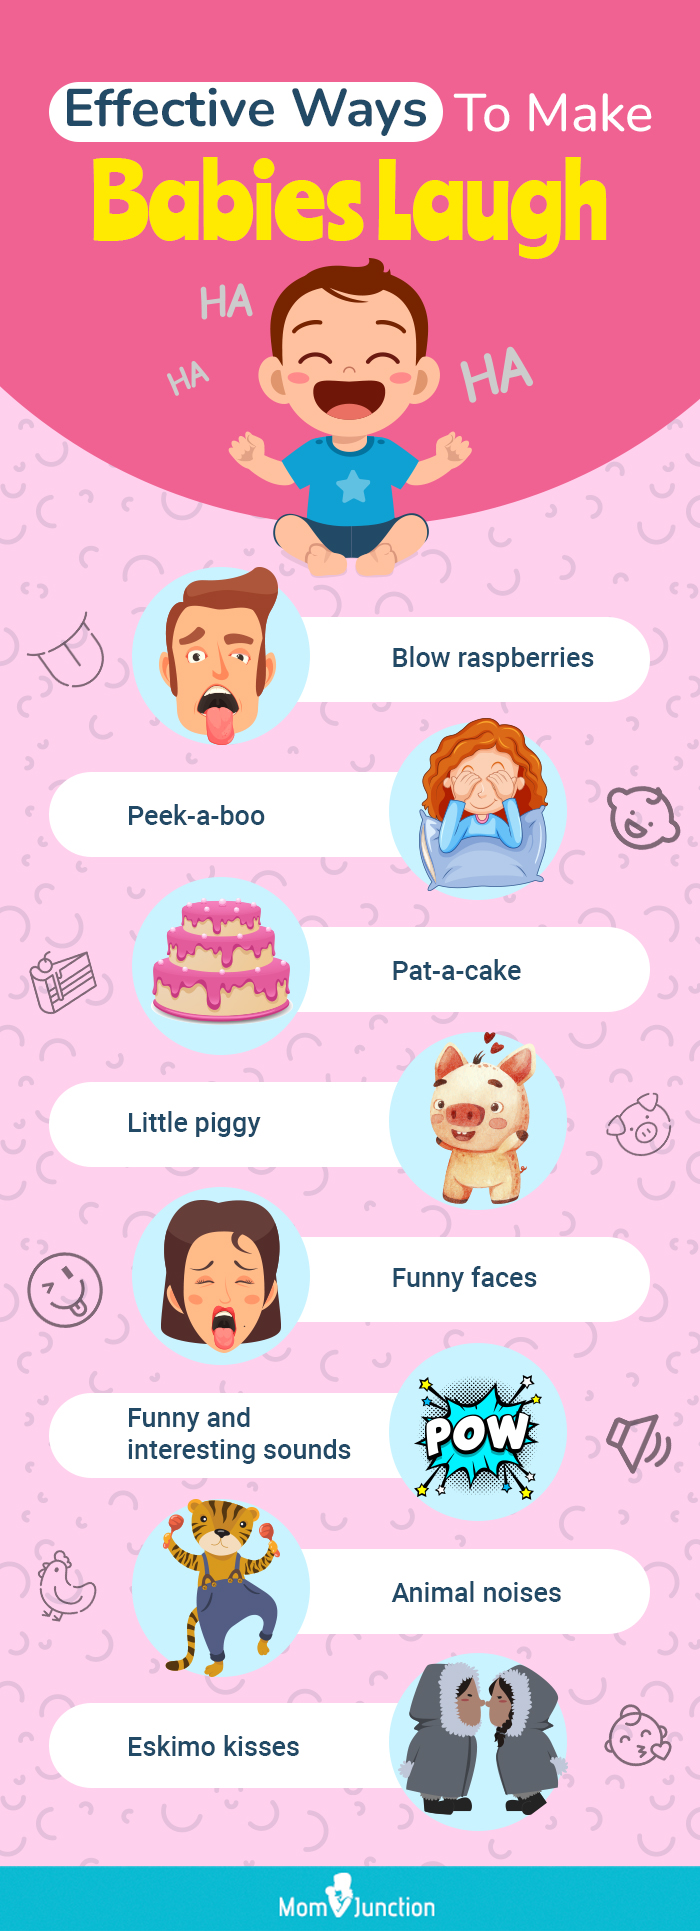 effective ways to make babies laugh (infographic)